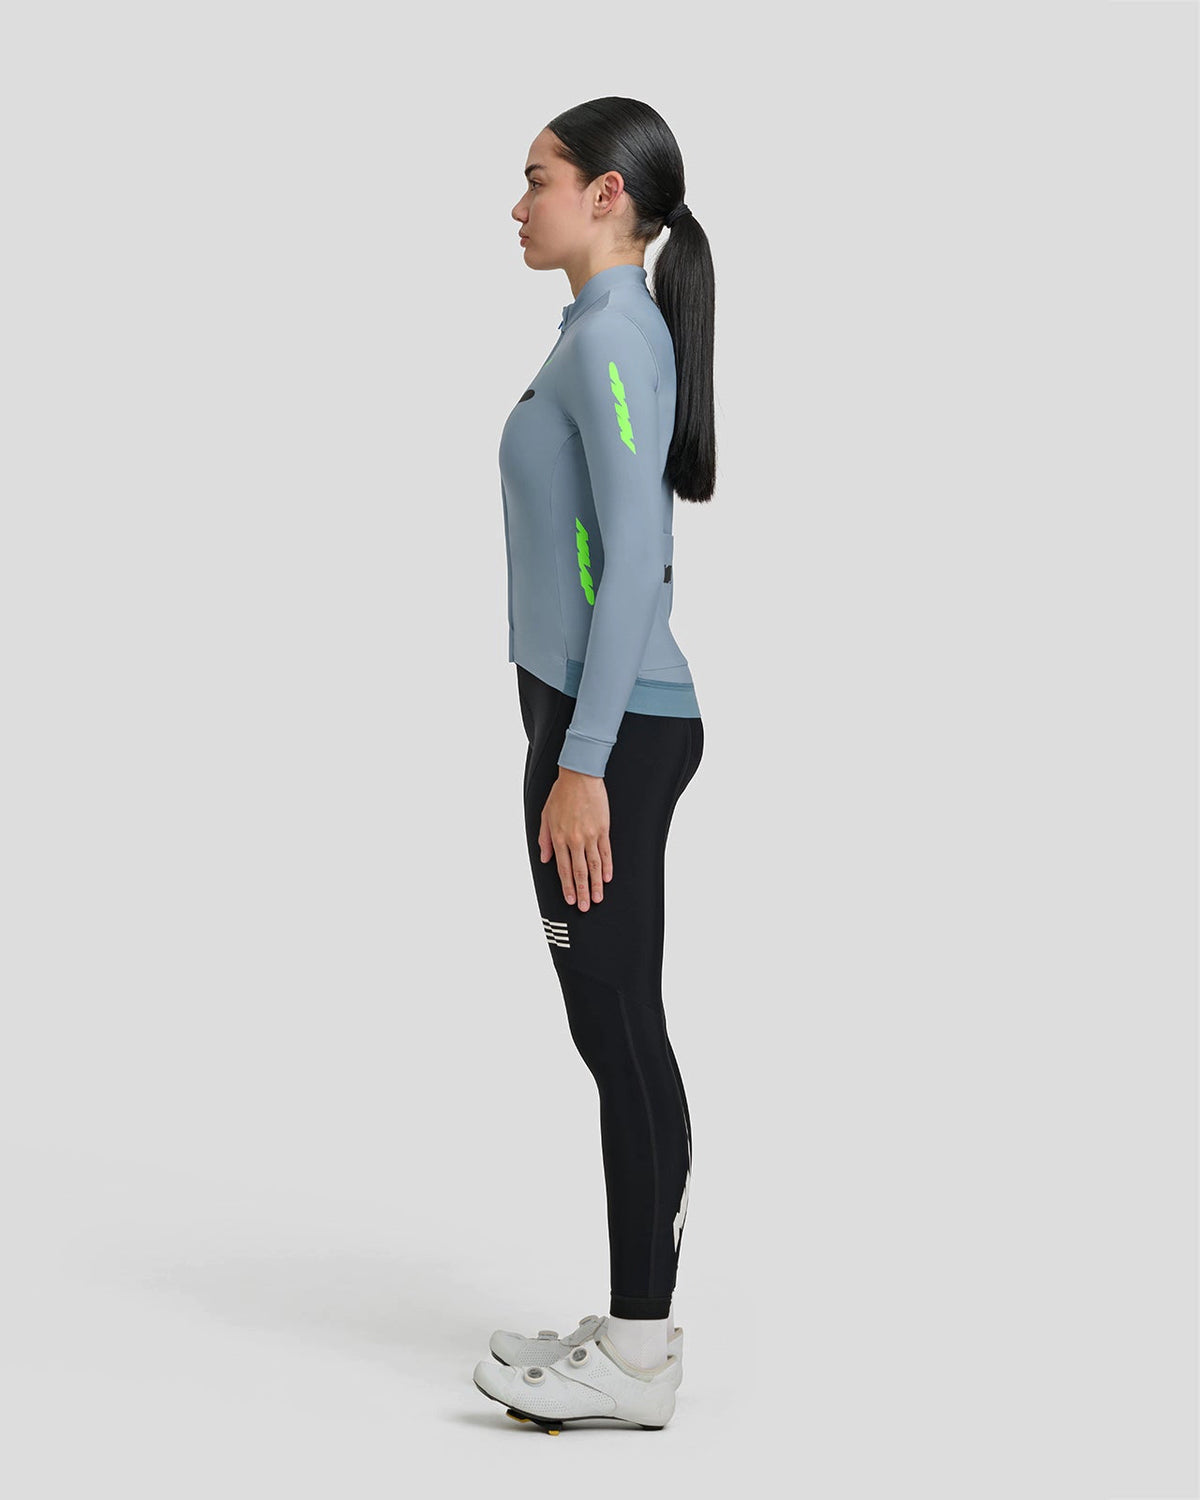 MAAP Women&#39;s Eclipse Thermal LS Jersey 2.0 Teal レディース長袖サイクルジャージ  | CYCLISM